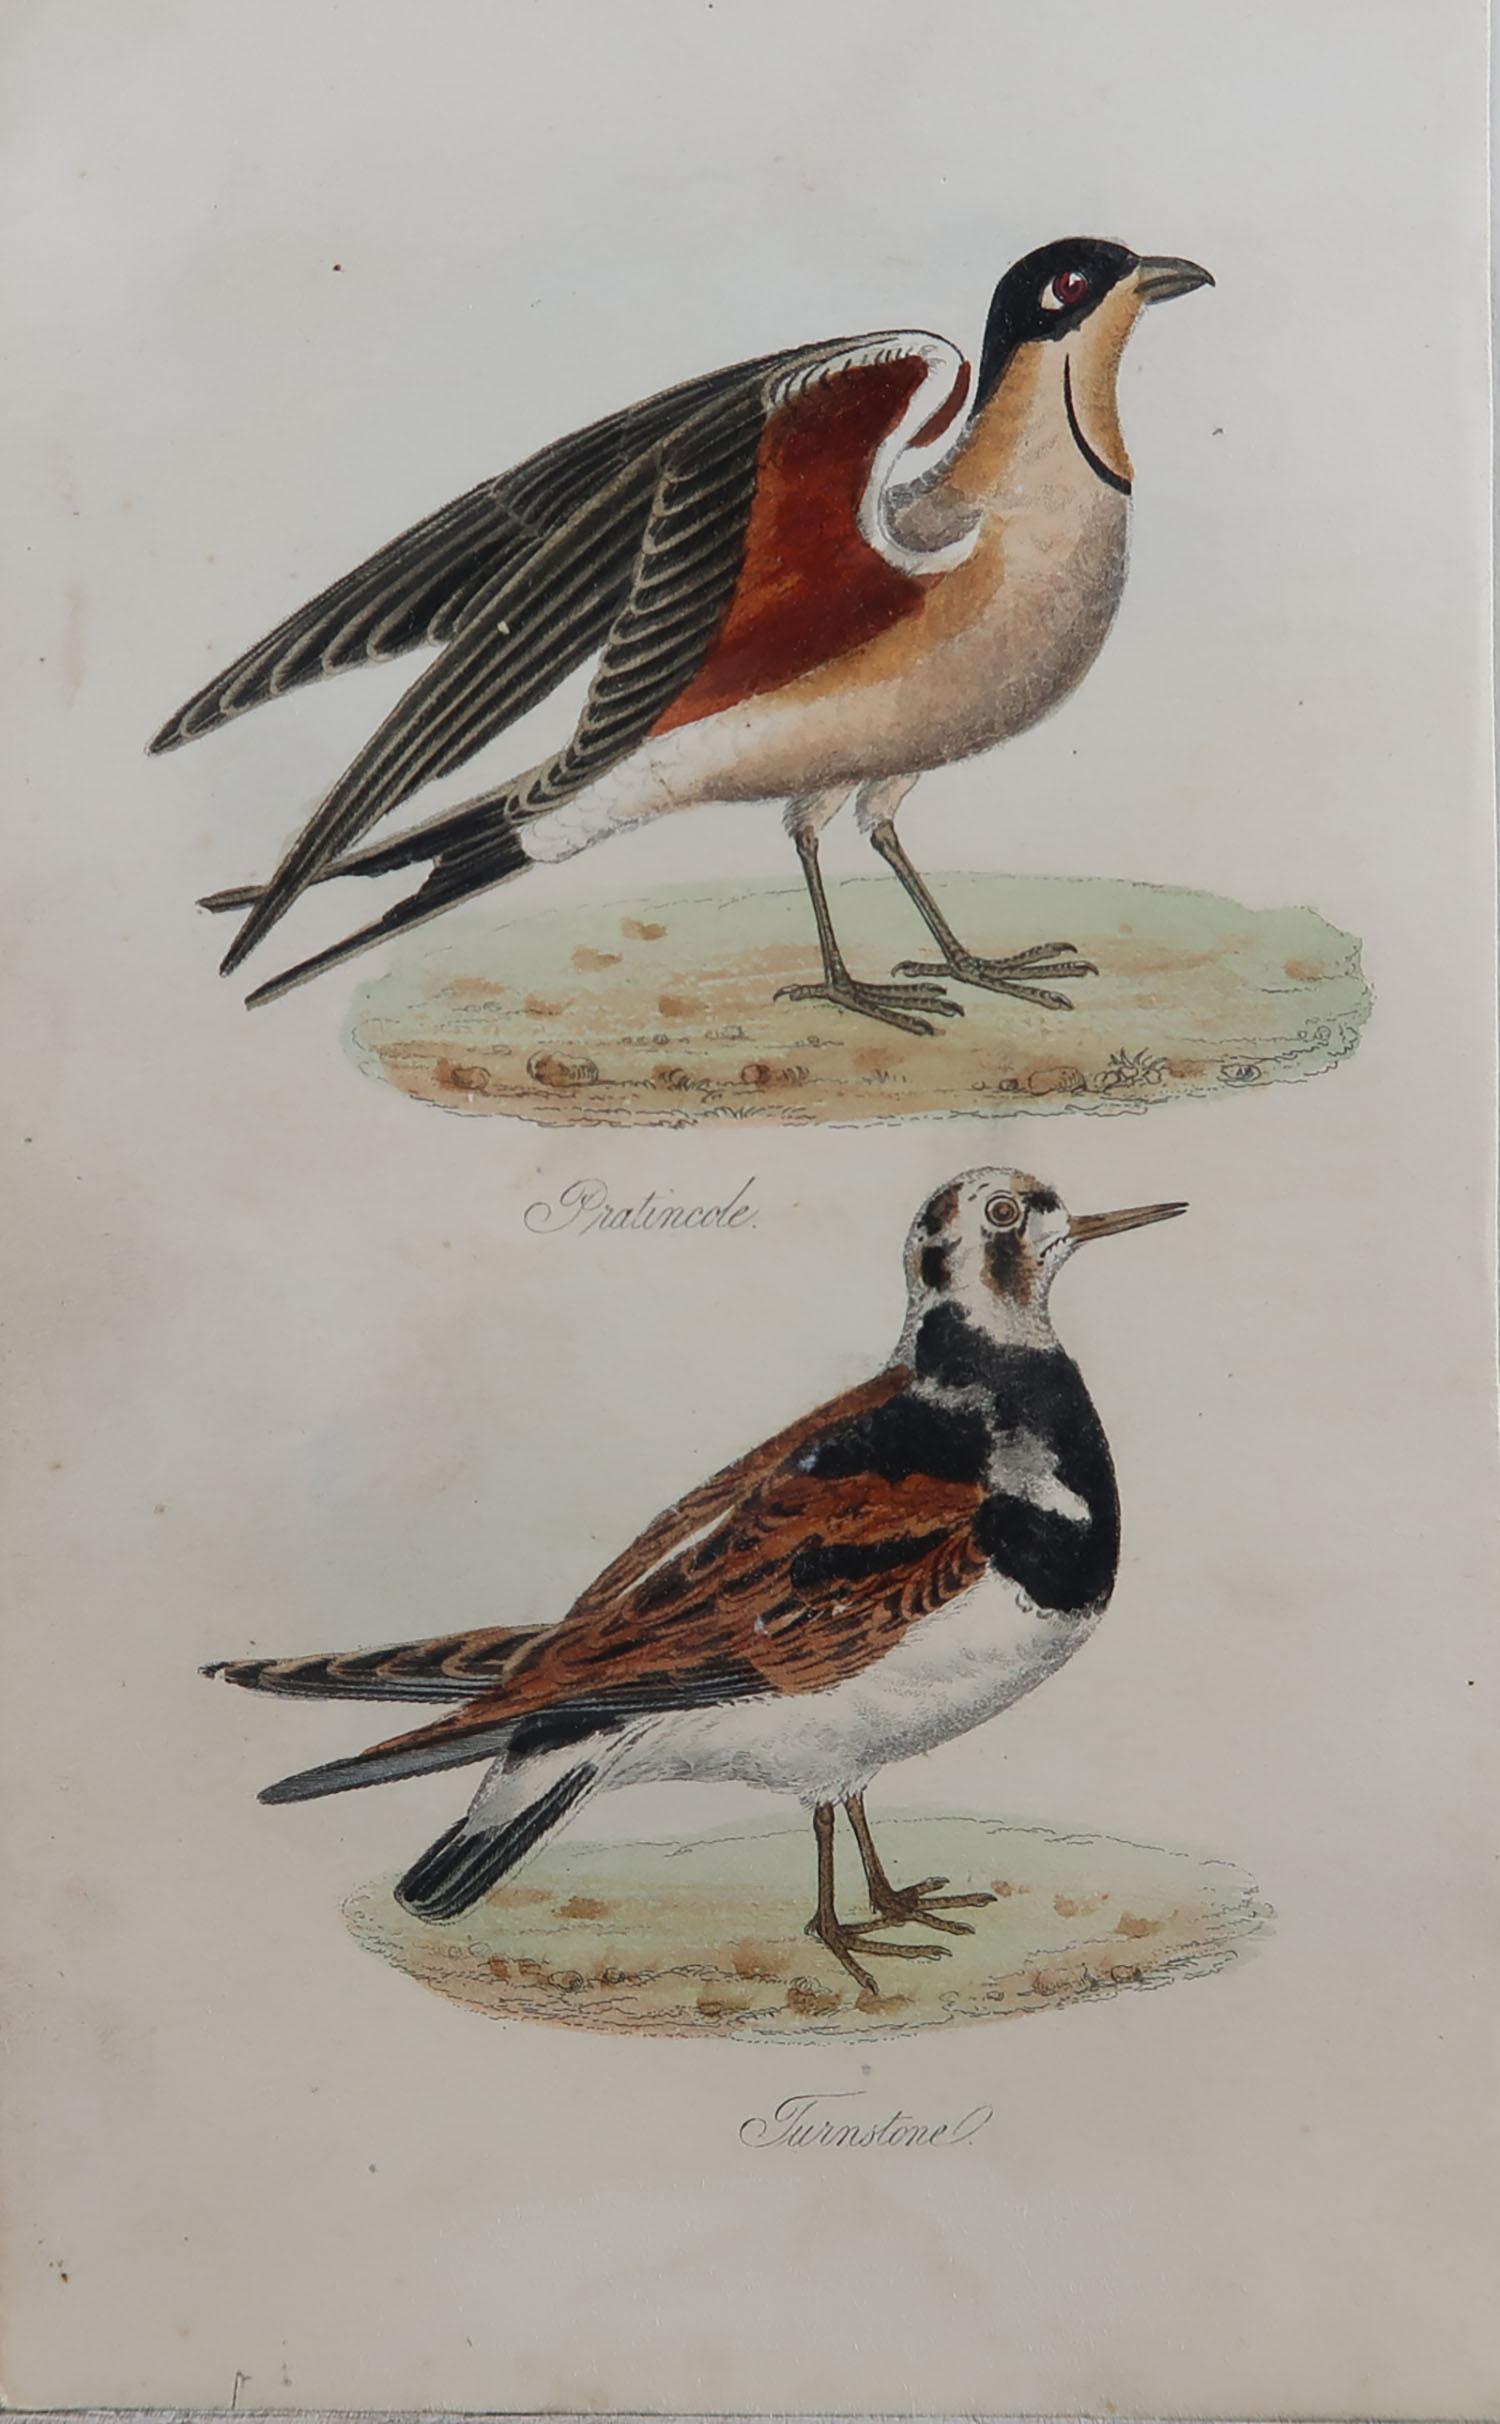 Great image of a Pratincole and turnstone

Unframed. It gives you the option of perhaps making a set up using your own choice of frames.

Lithograph heightened with gum Arabic.

Original color

Published, circa 1850

Free